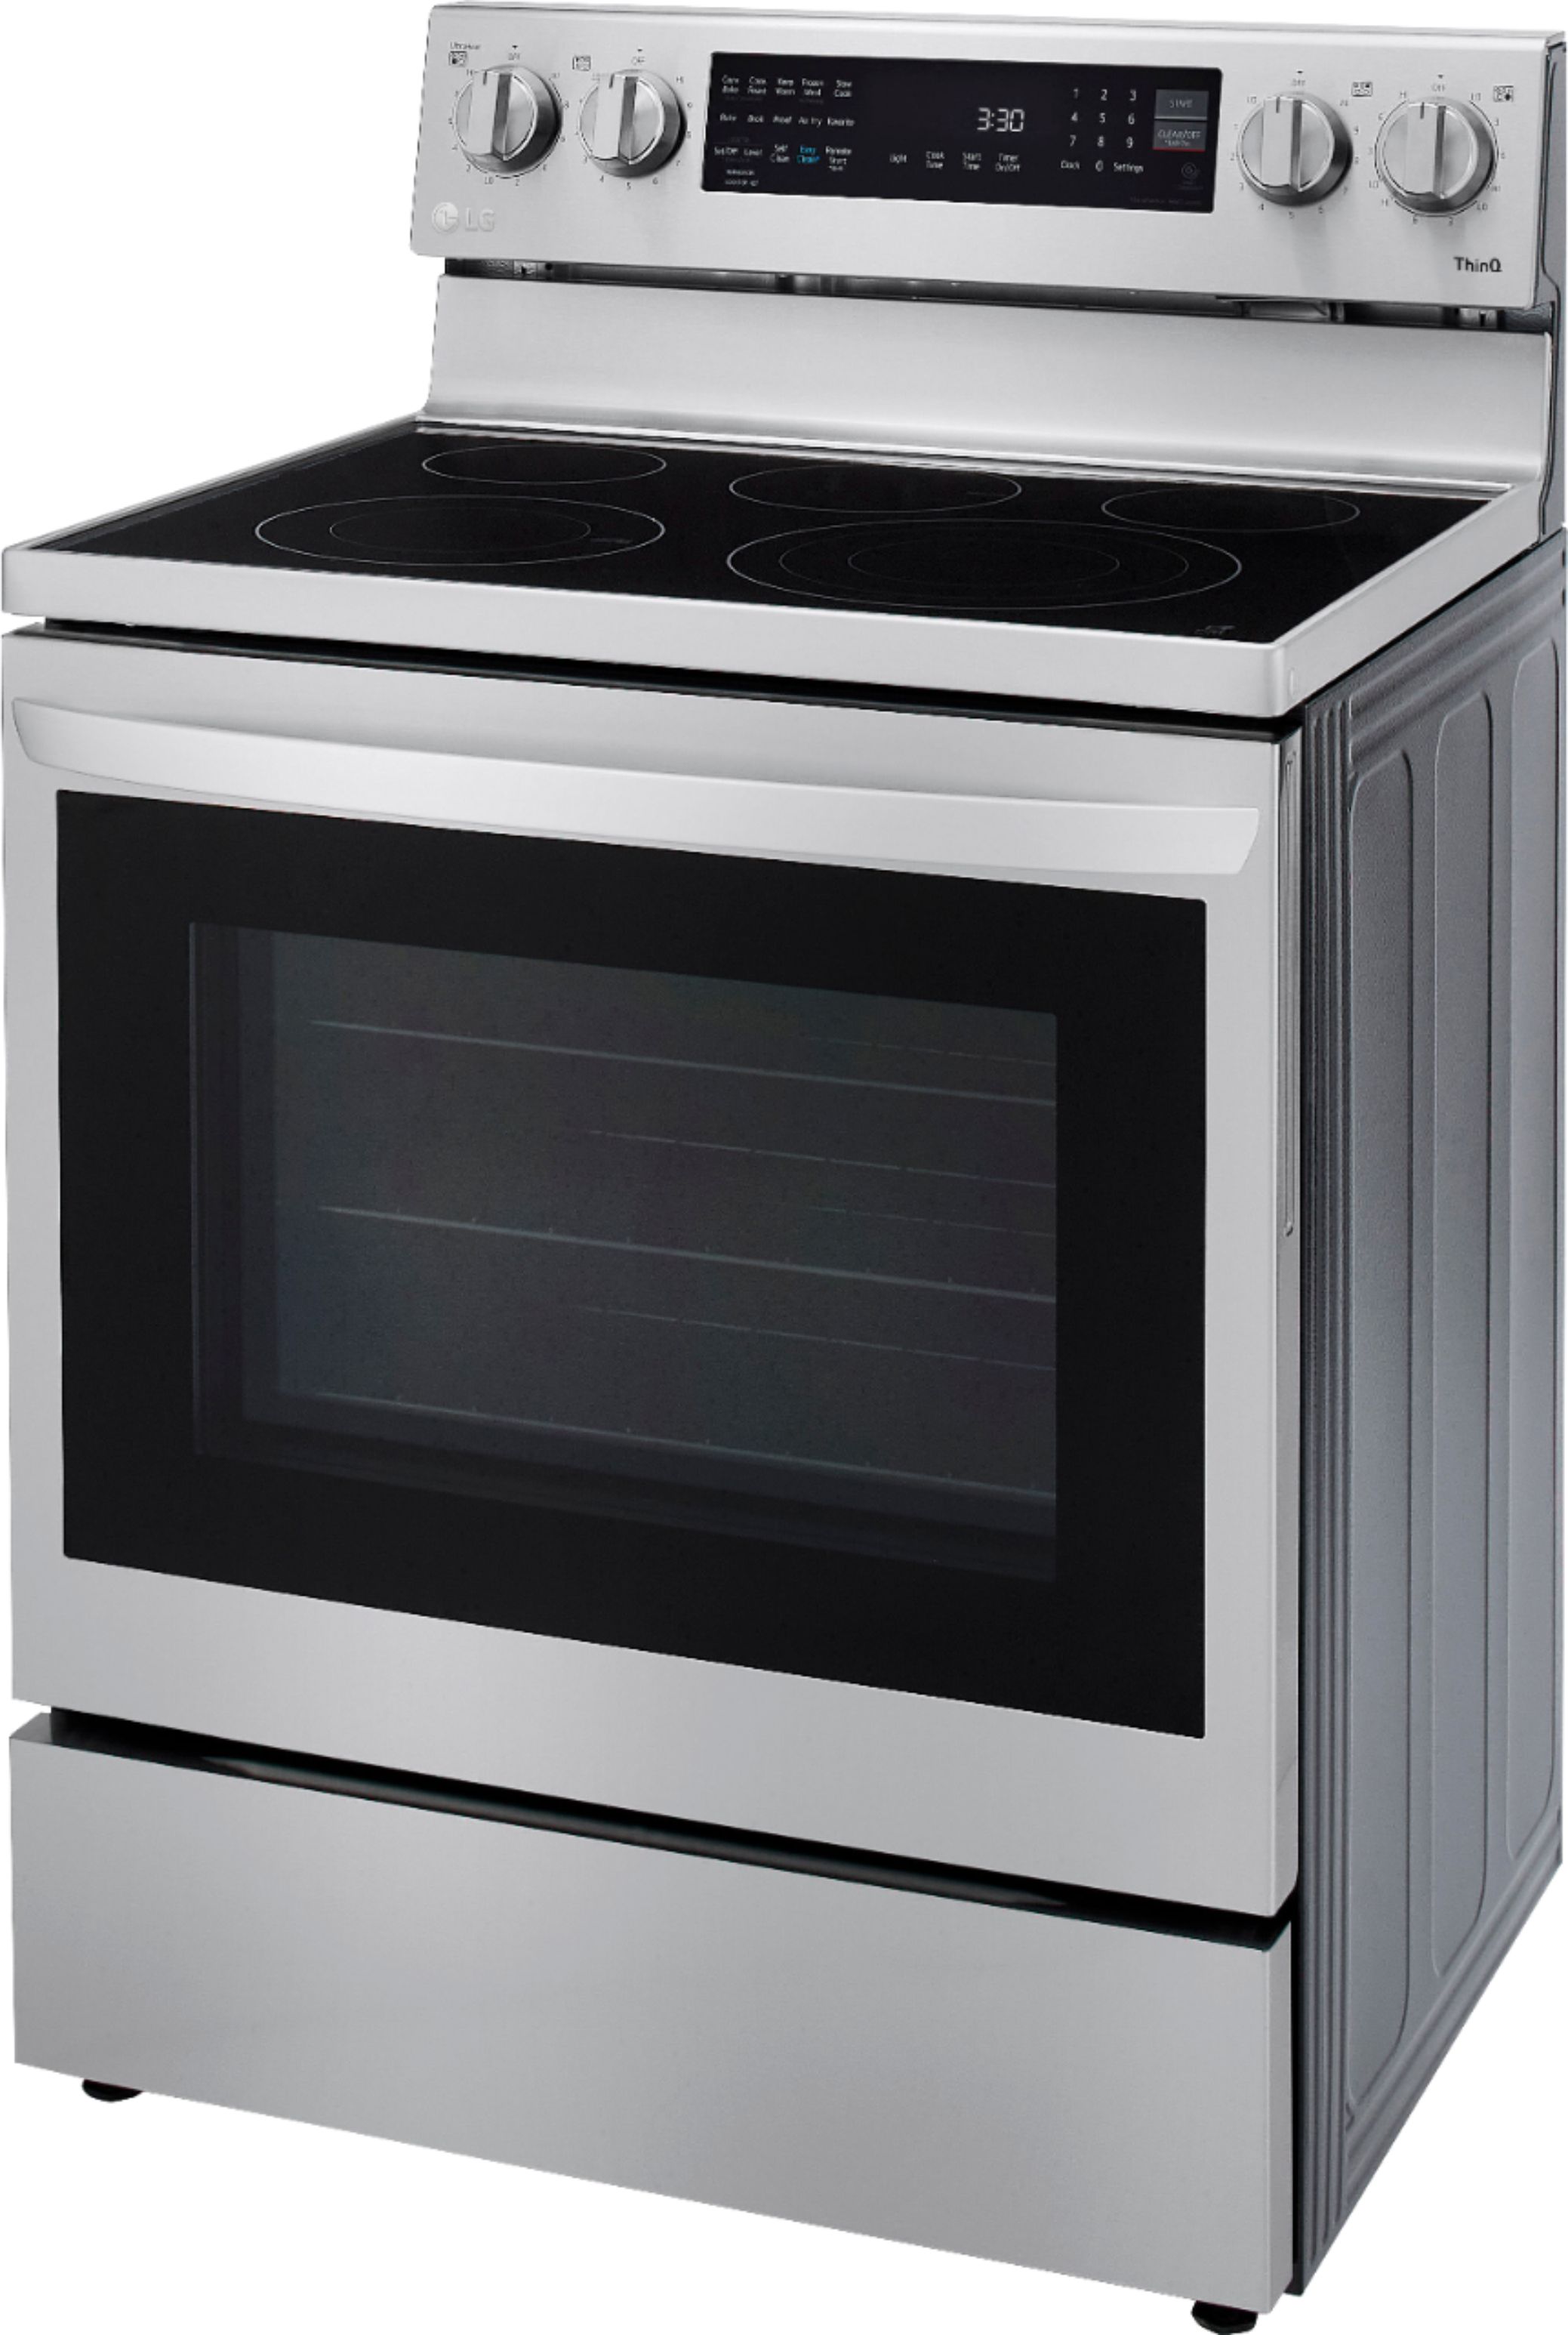 Angle View: LG - 6.3 Cu. Ft. Smart Freestanding Electric Convection Range with EasyClean, Air Fry and InstaView - Stainless steel